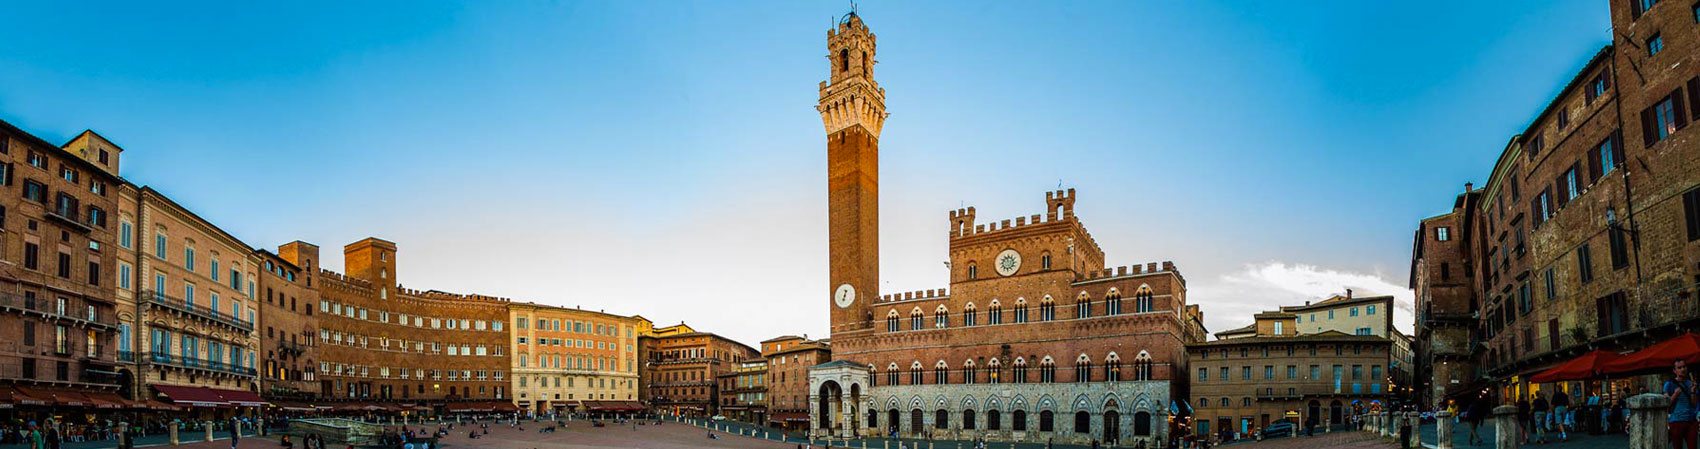 View of Piazza del Campo in Siena, Tuscany